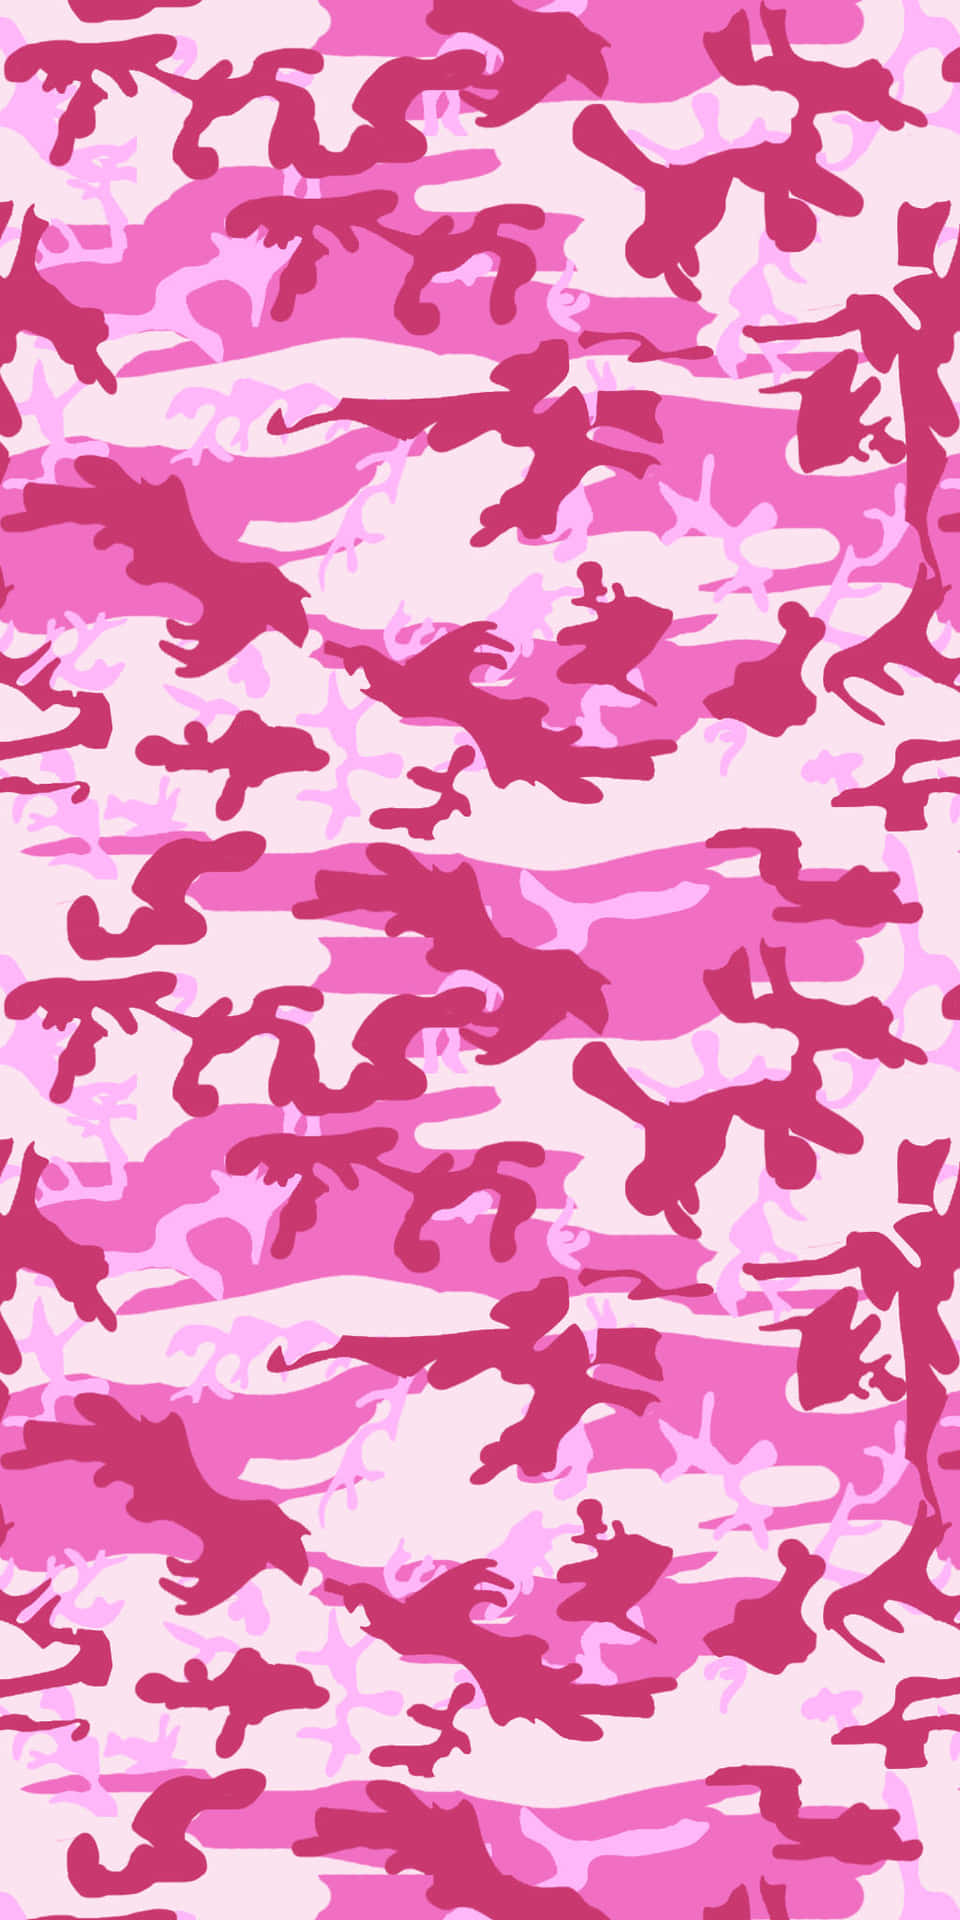 Hit the outdoors in trendy style with Pink Camo! Wallpaper